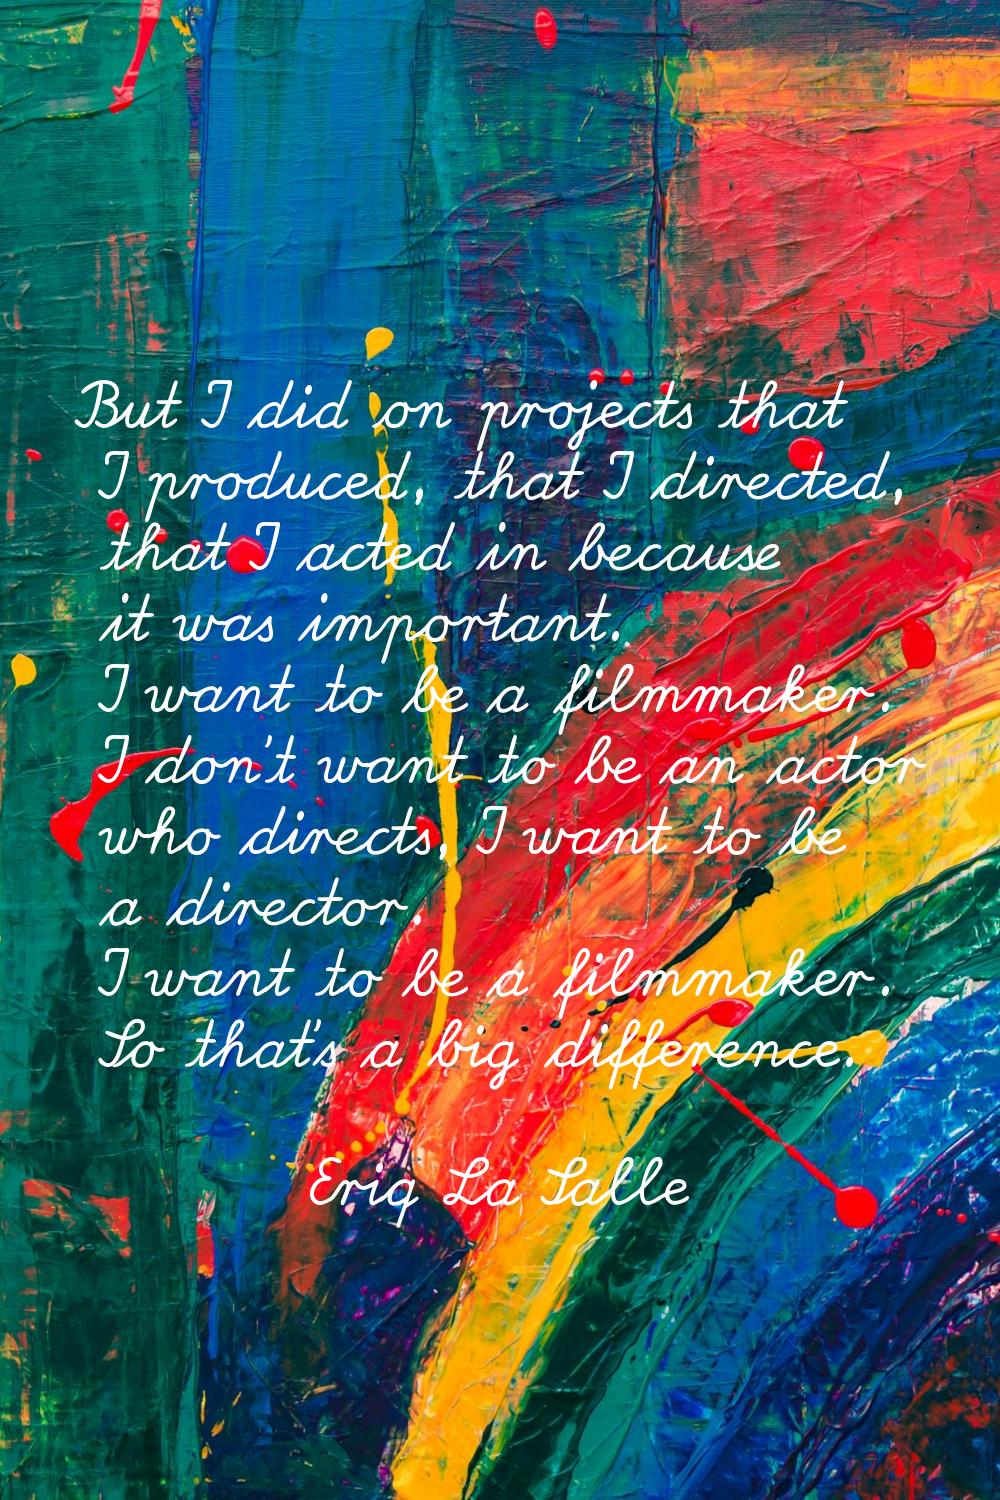 But I did on projects that I produced, that I directed, that I acted in because it was important. I